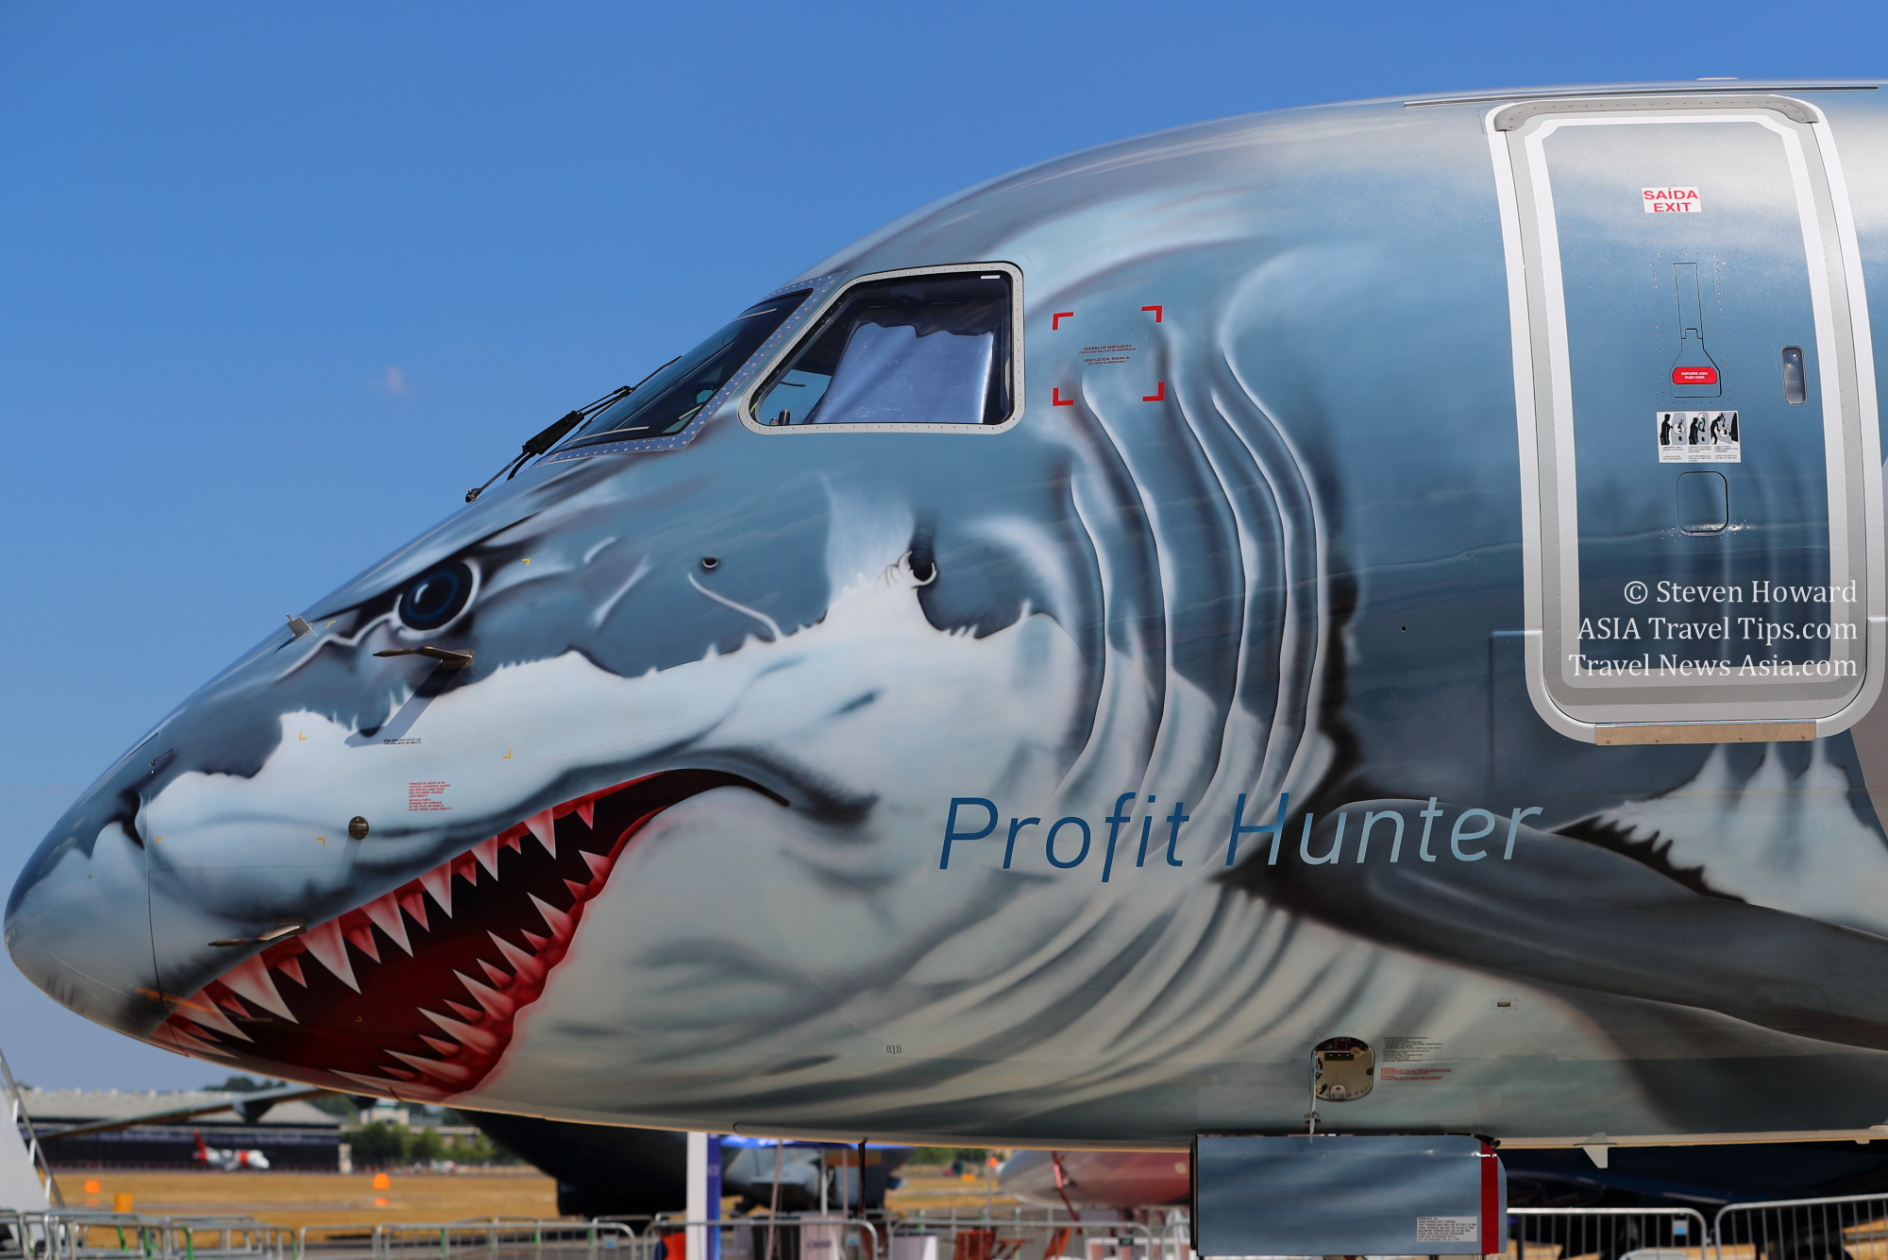 Embraer E195-E2 Profit Hunter. Picture by Steven Howard of TravelNewsAsia.com Click to enlarge.